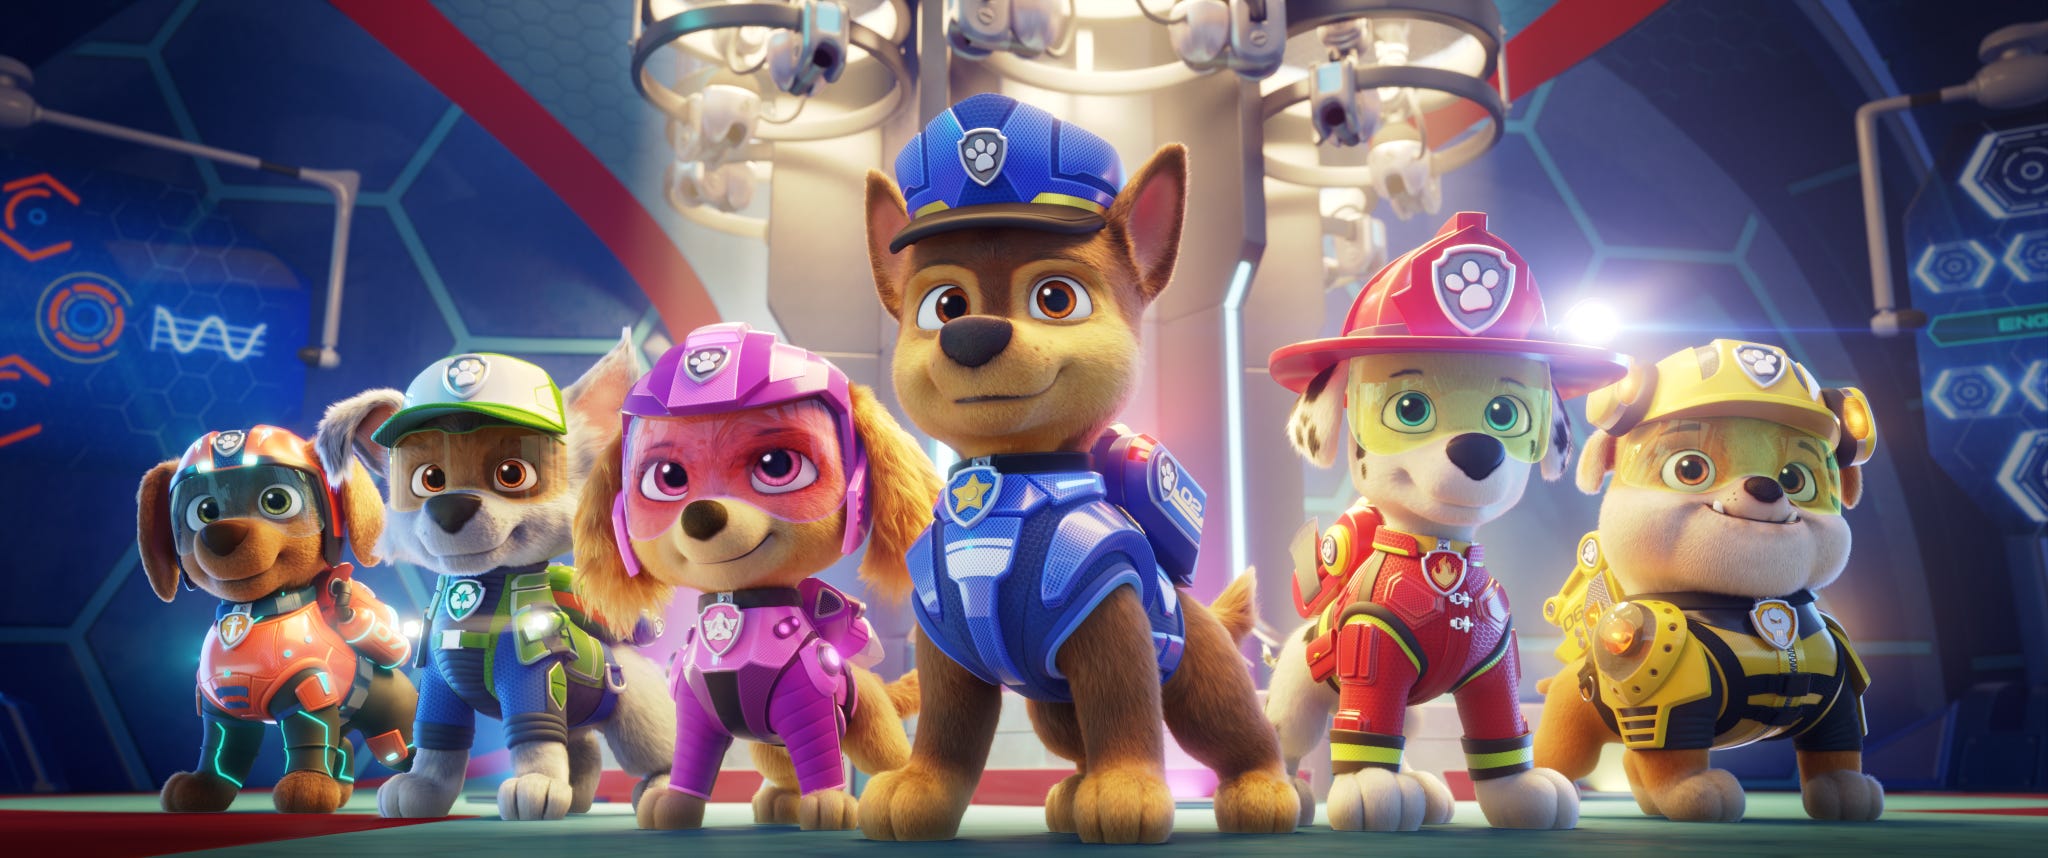 New on DVD: Cartoon canines journey from TV film in 'Paw Patrol: The